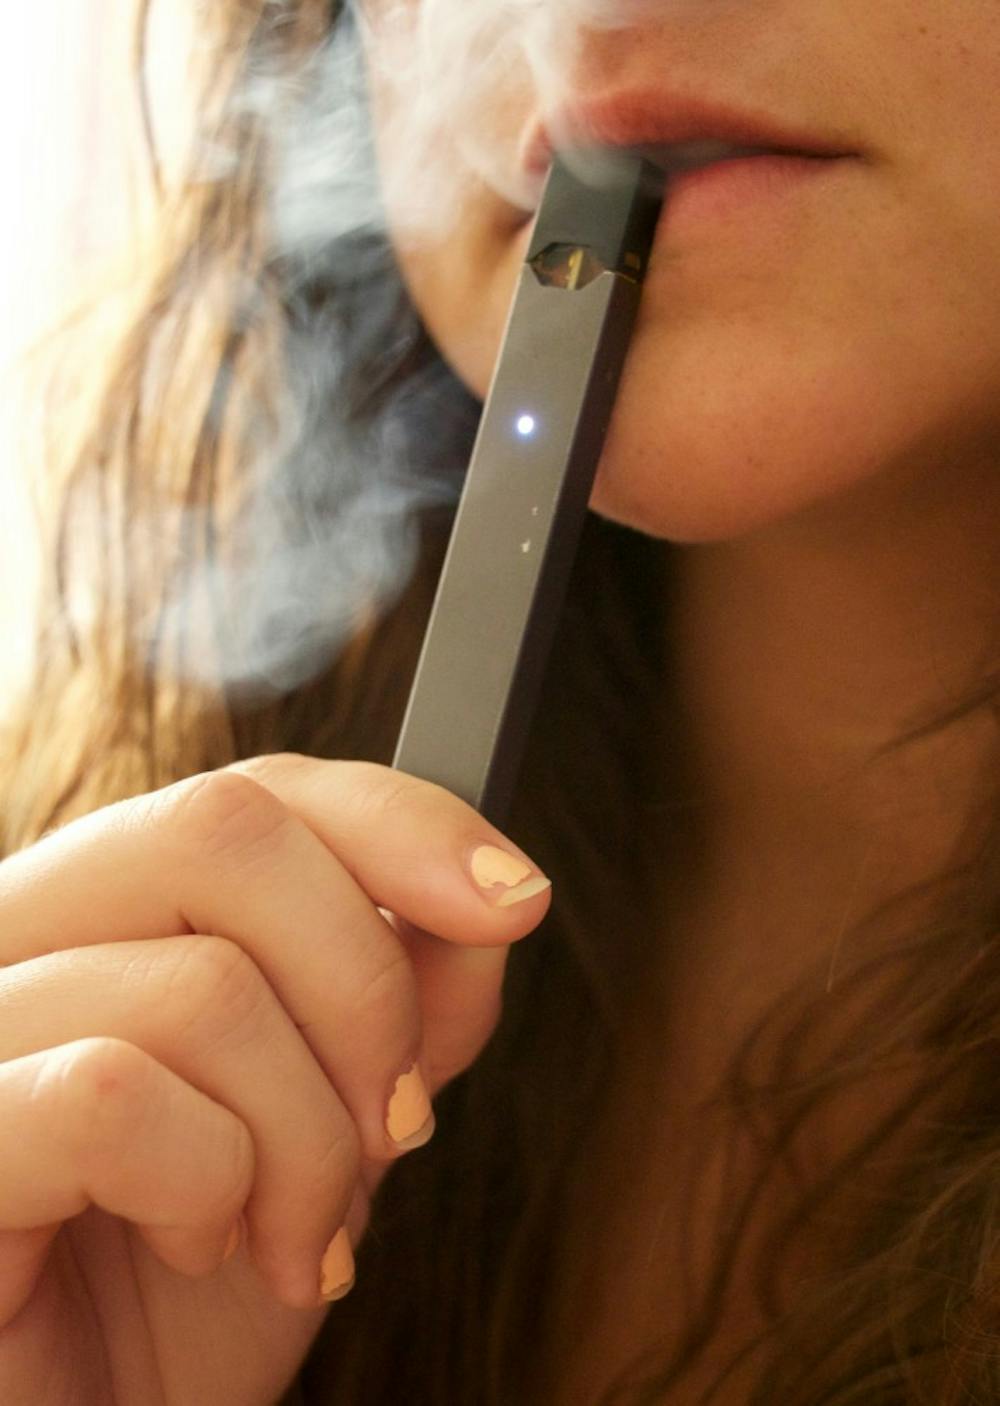 Ball State students, hospital staff learn about dangers of e-cigarettes